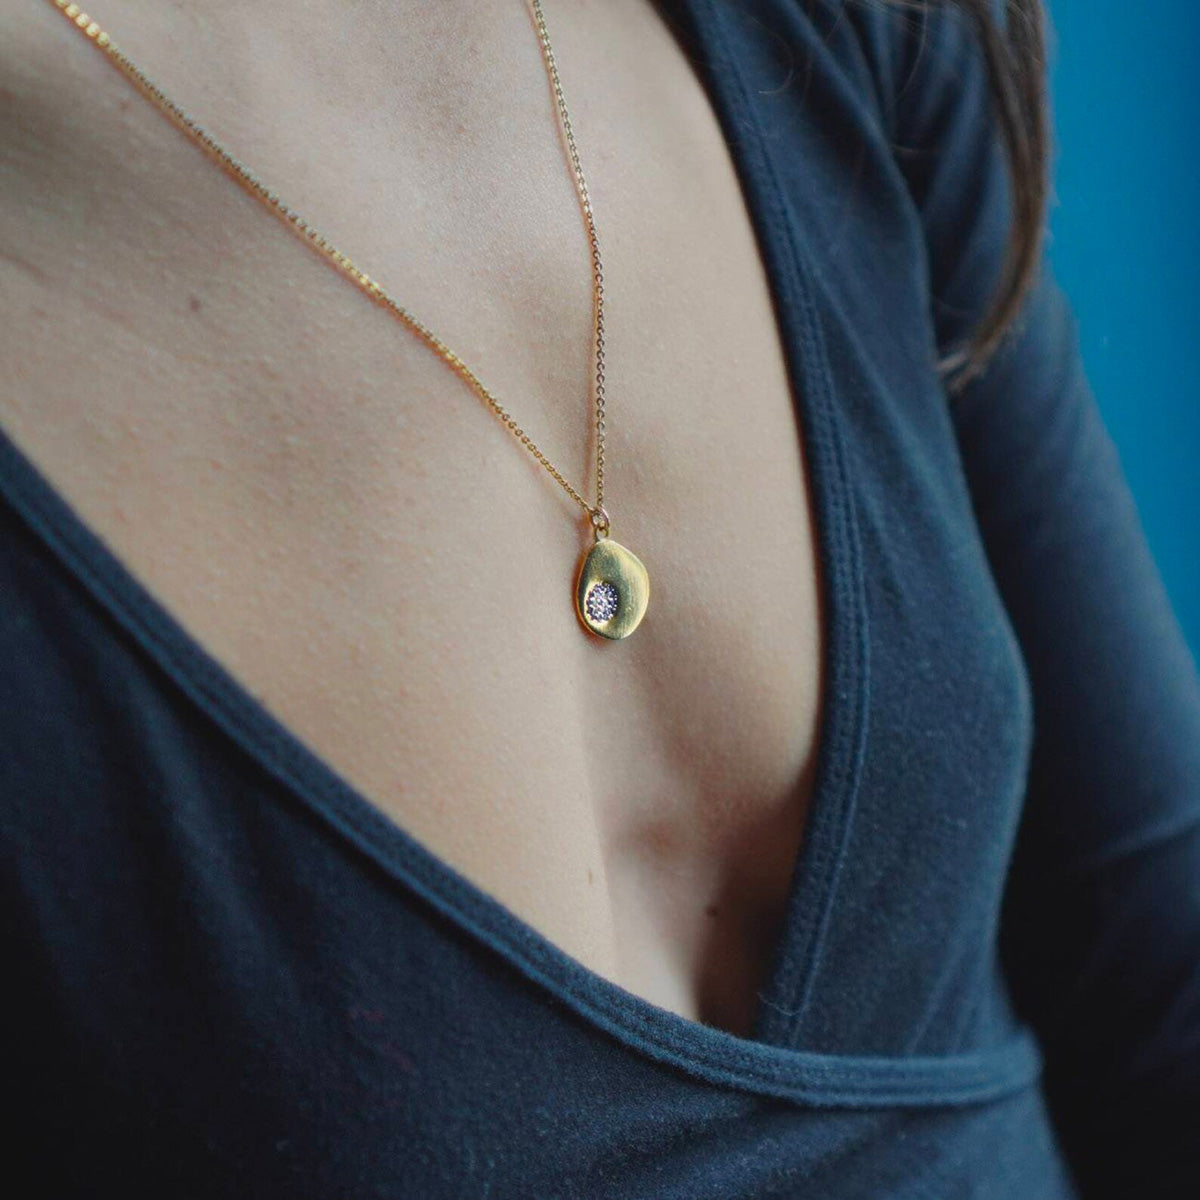 Thospitis necklace